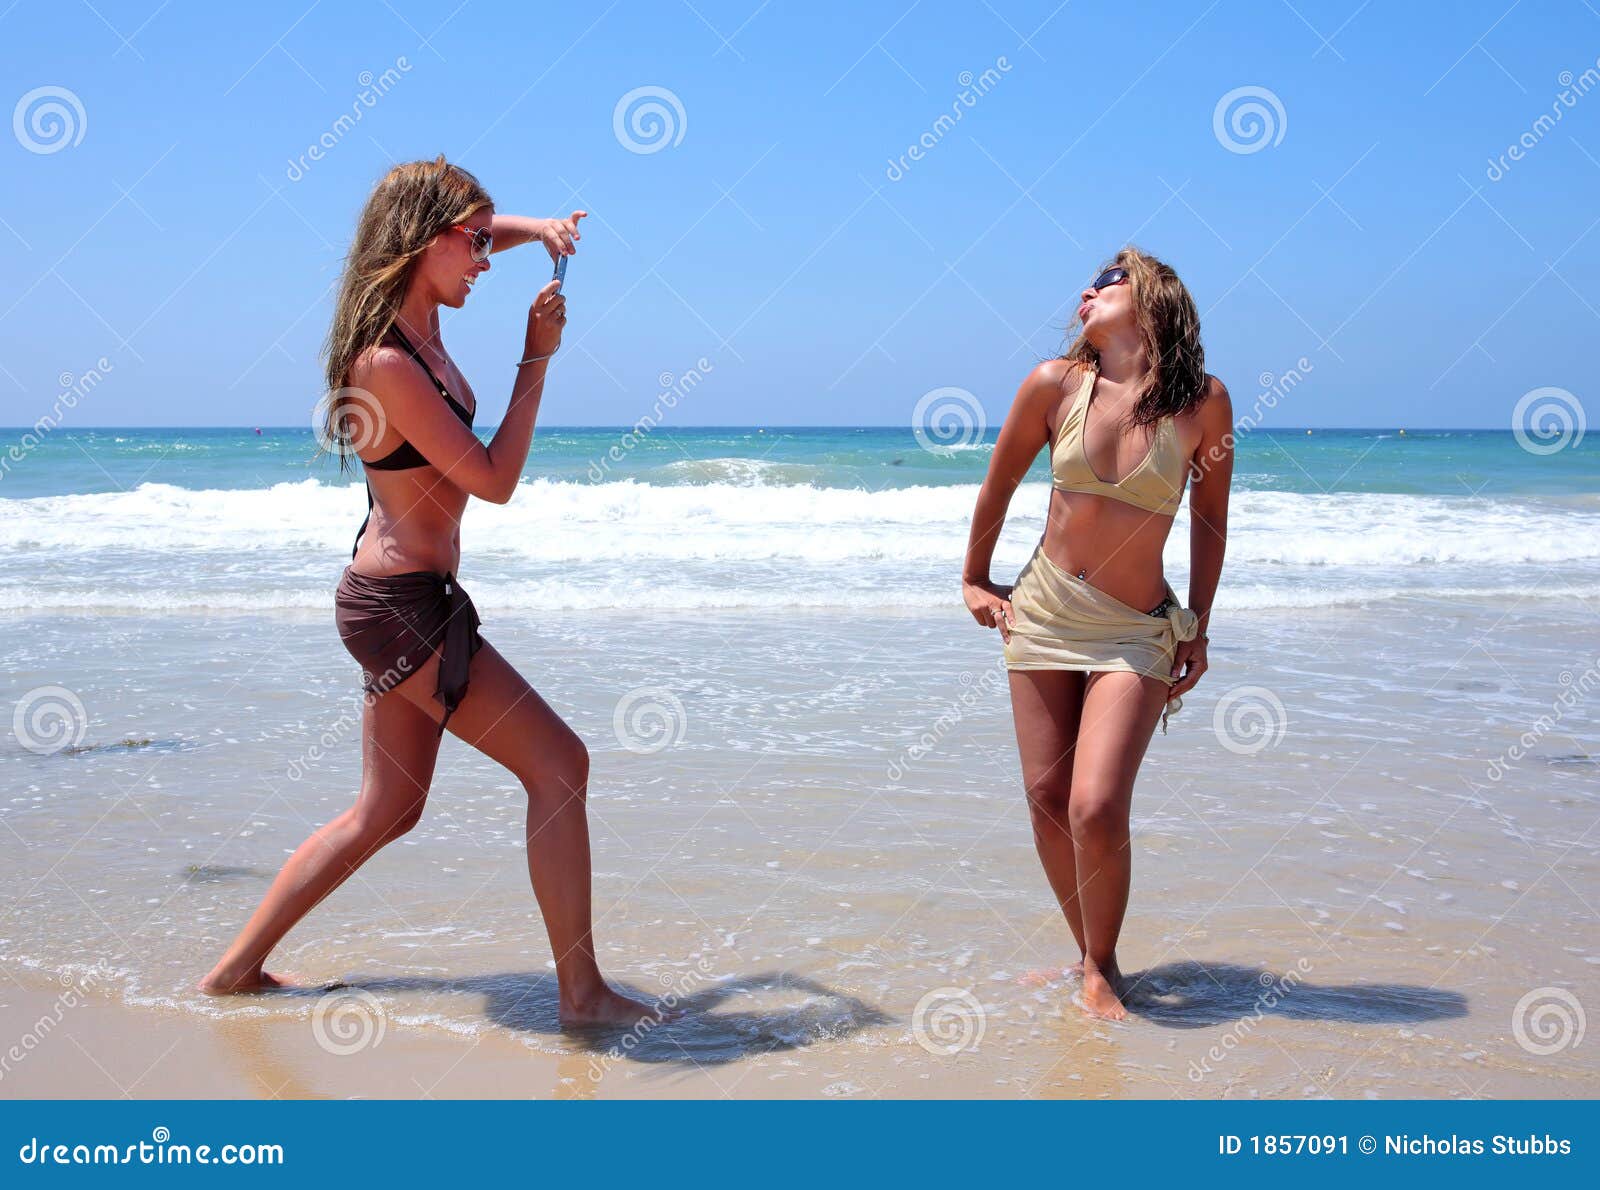 Two Young Women Playing on the Beach on Vacation or Holiday Stock Image